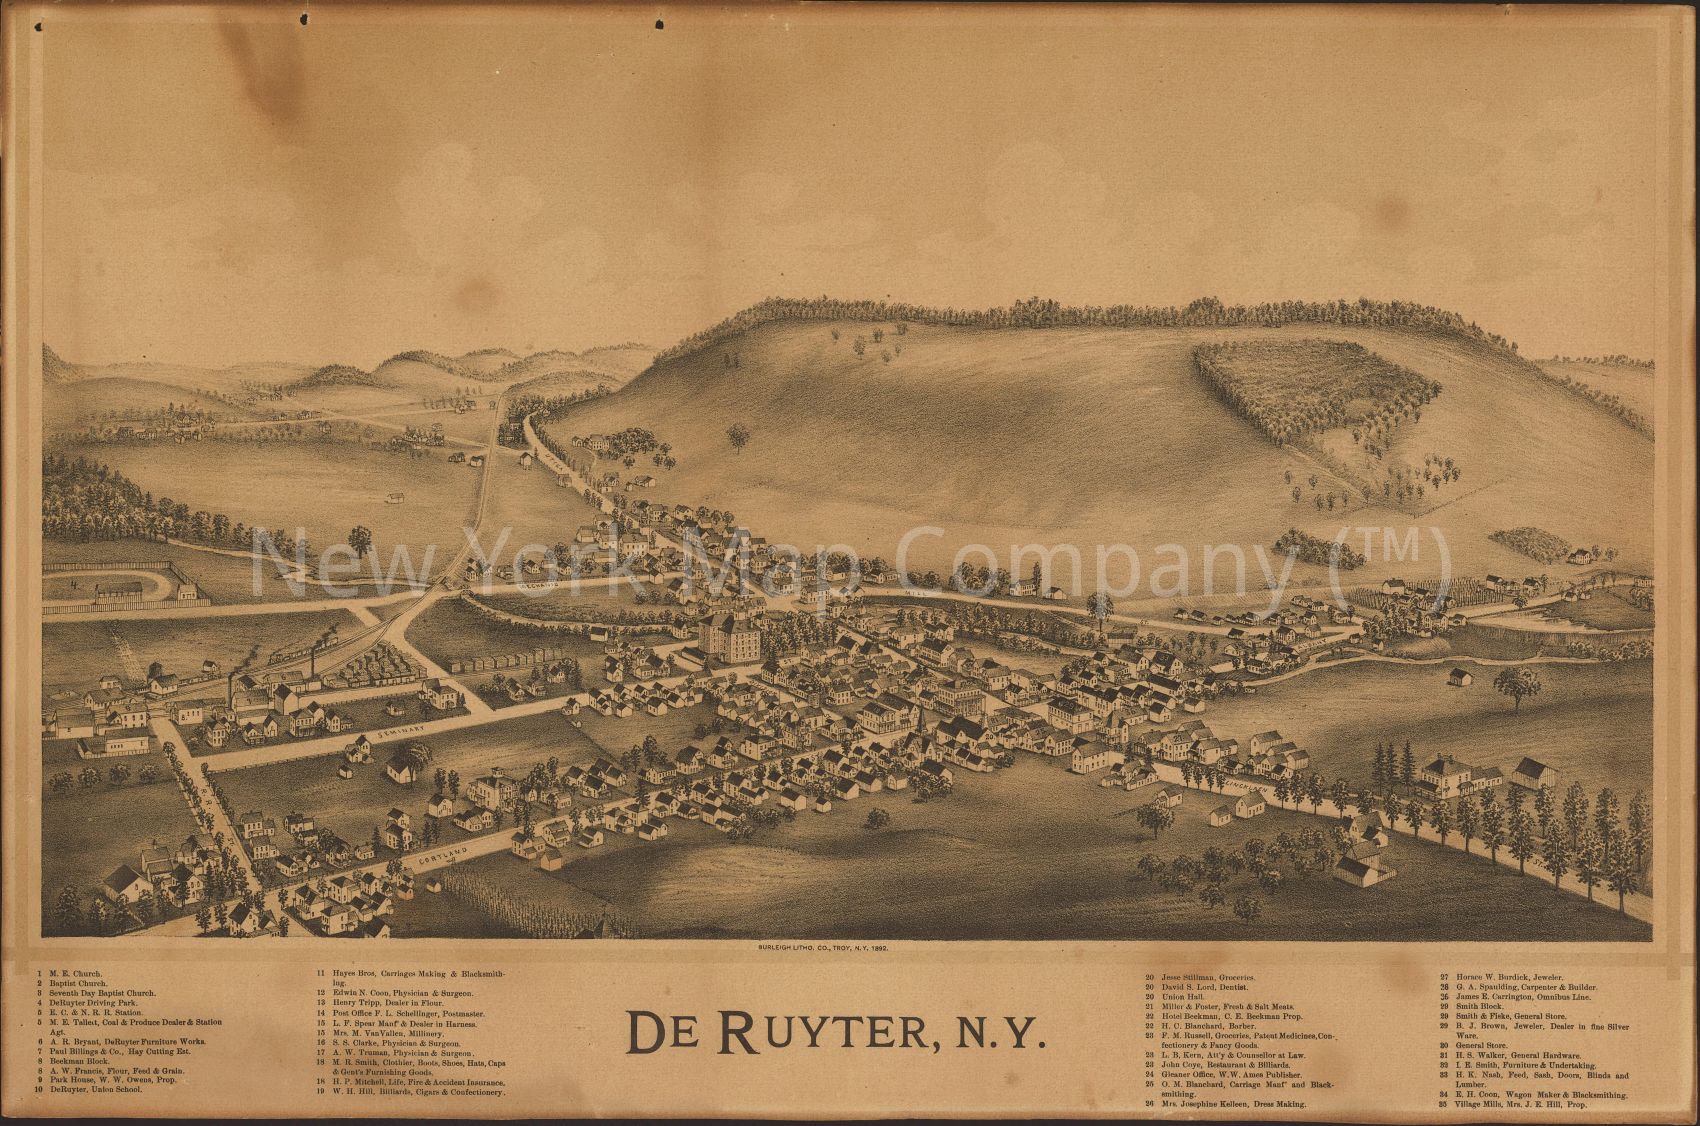 1892 map De Ruyter, N.Y. Map Subjects: Deruyter | Deruyter NY | New York |